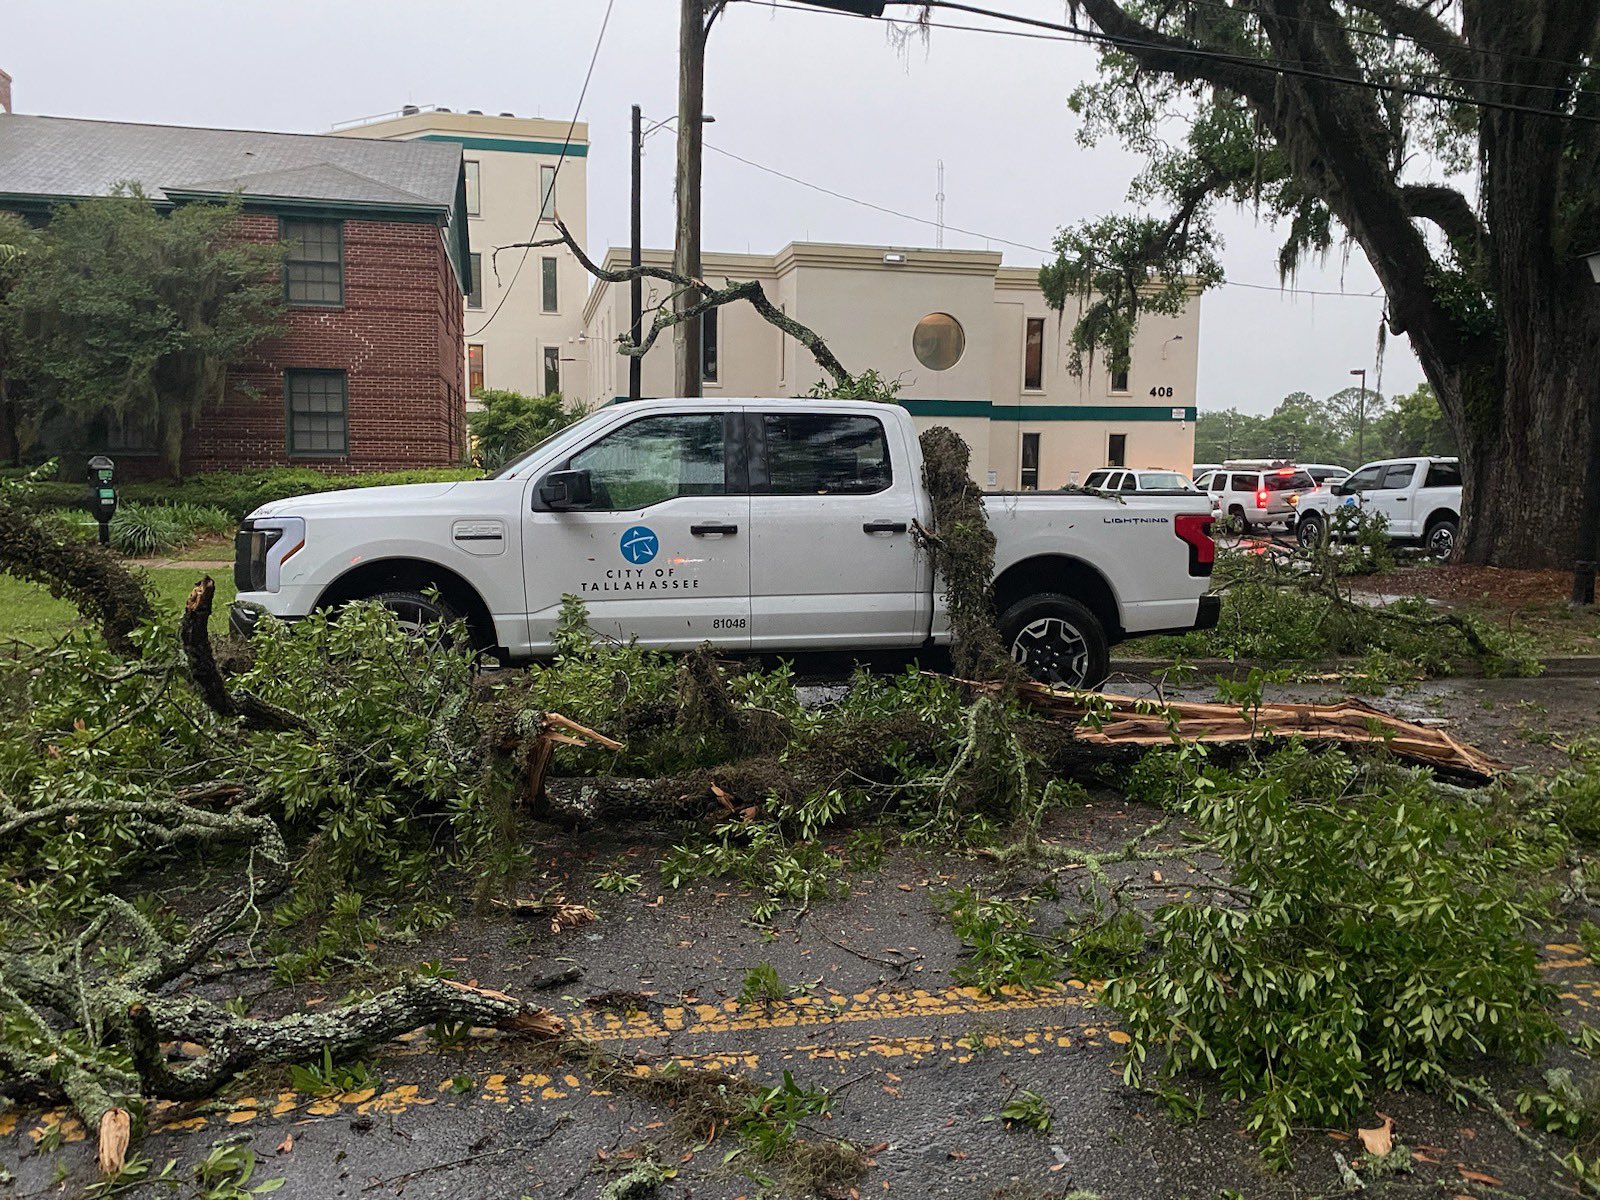 a City of Tallahassee vehicle responding to damage